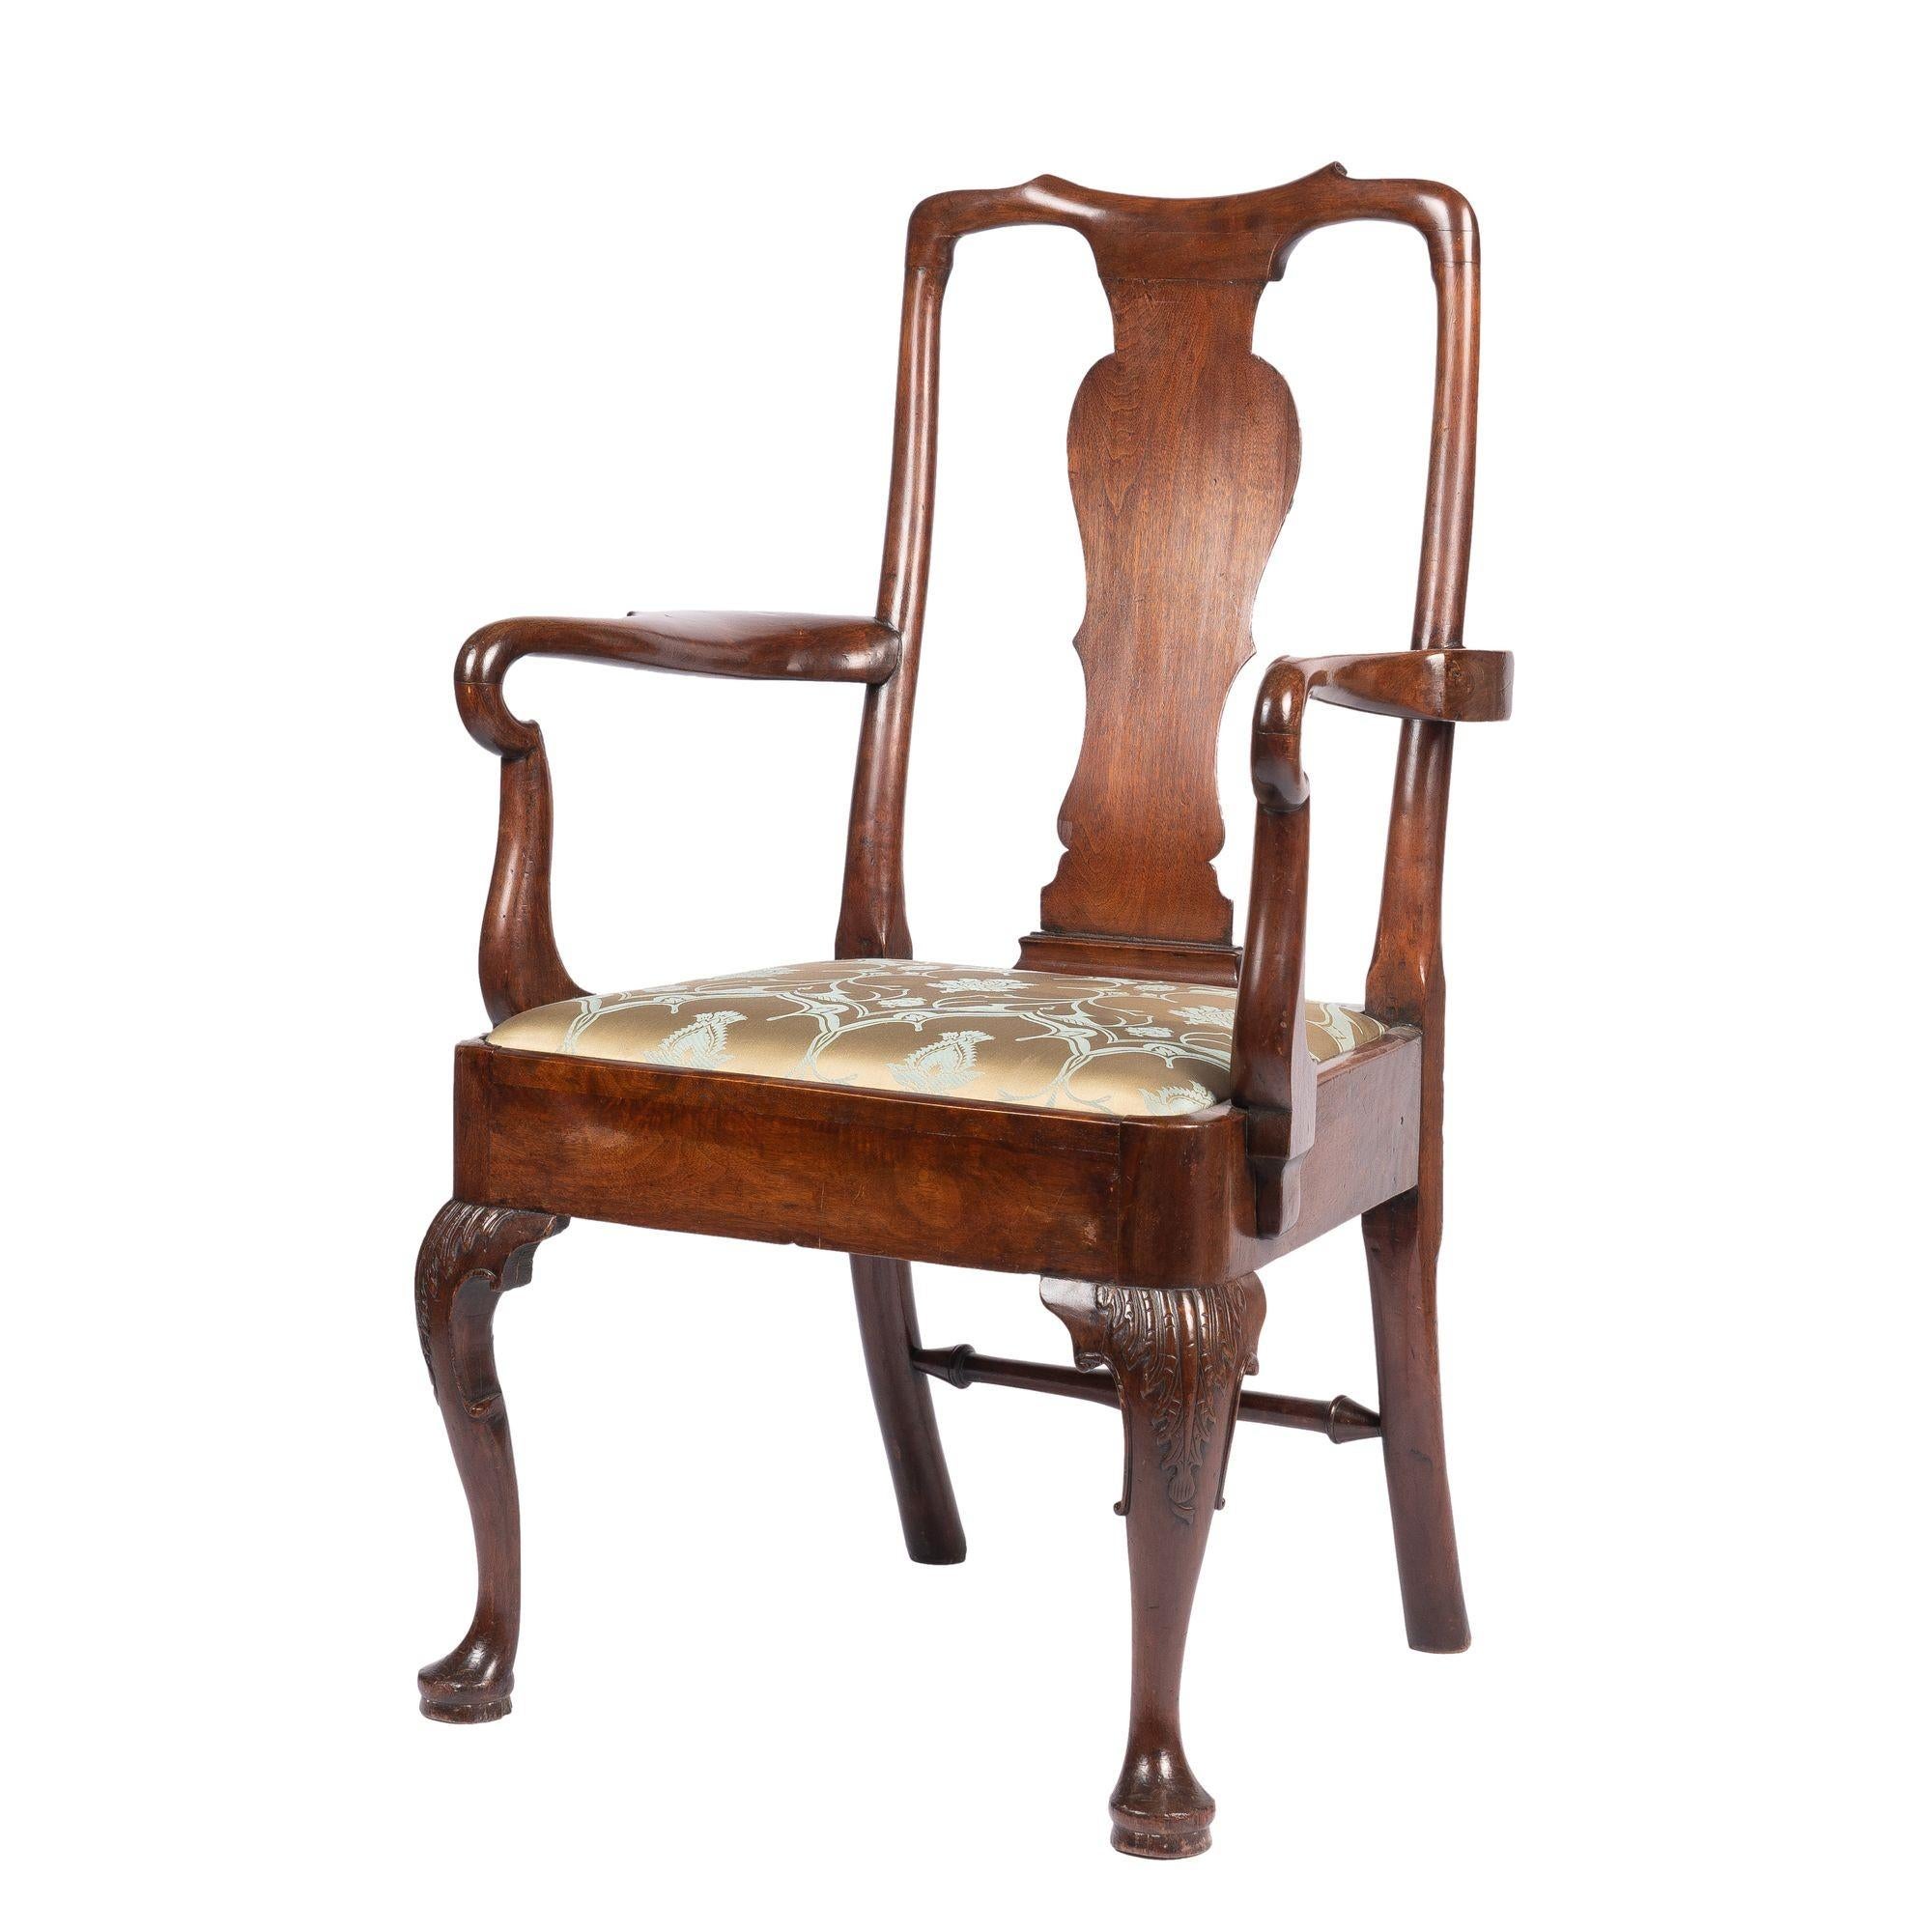 Queen Anne / George I chair with shepherd crook arms and vasiform splat beneath a yoke crest rail. The upholstered slip set is supported by cabriole front legs which terminate in a pad foot.

England, circa 1720.